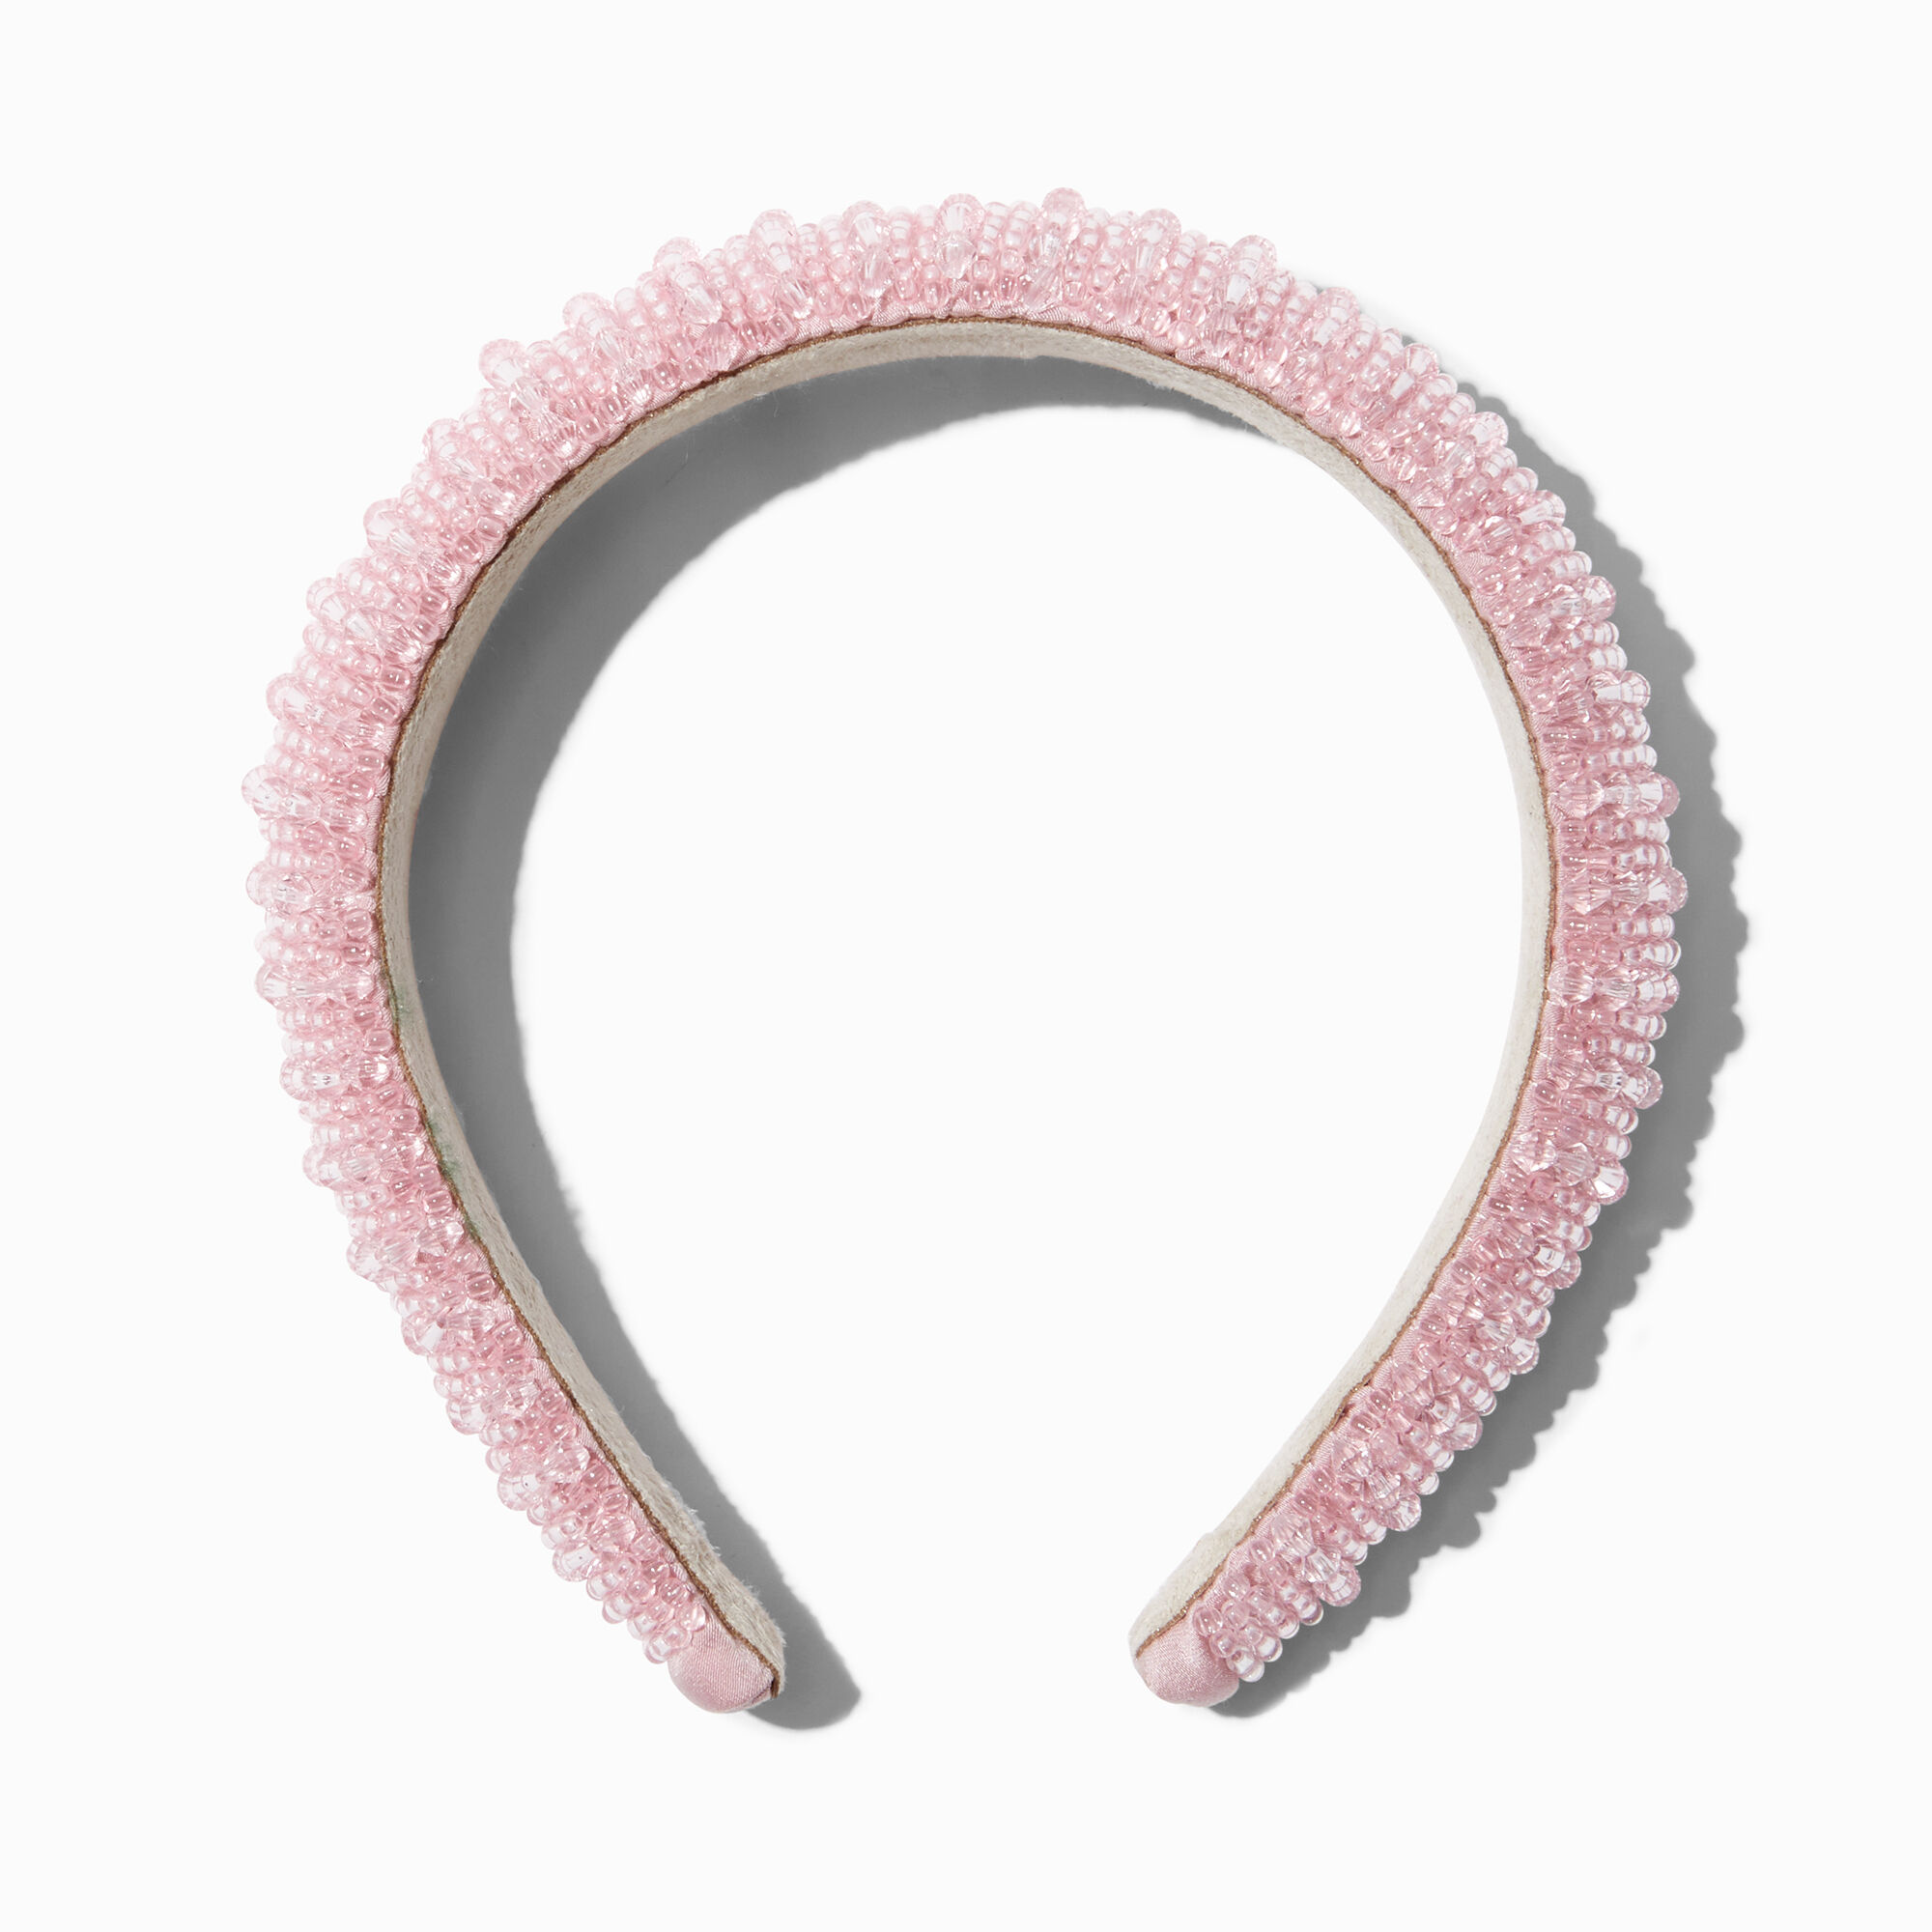 View Claires Blush Crystal Puffy Headband Pink information